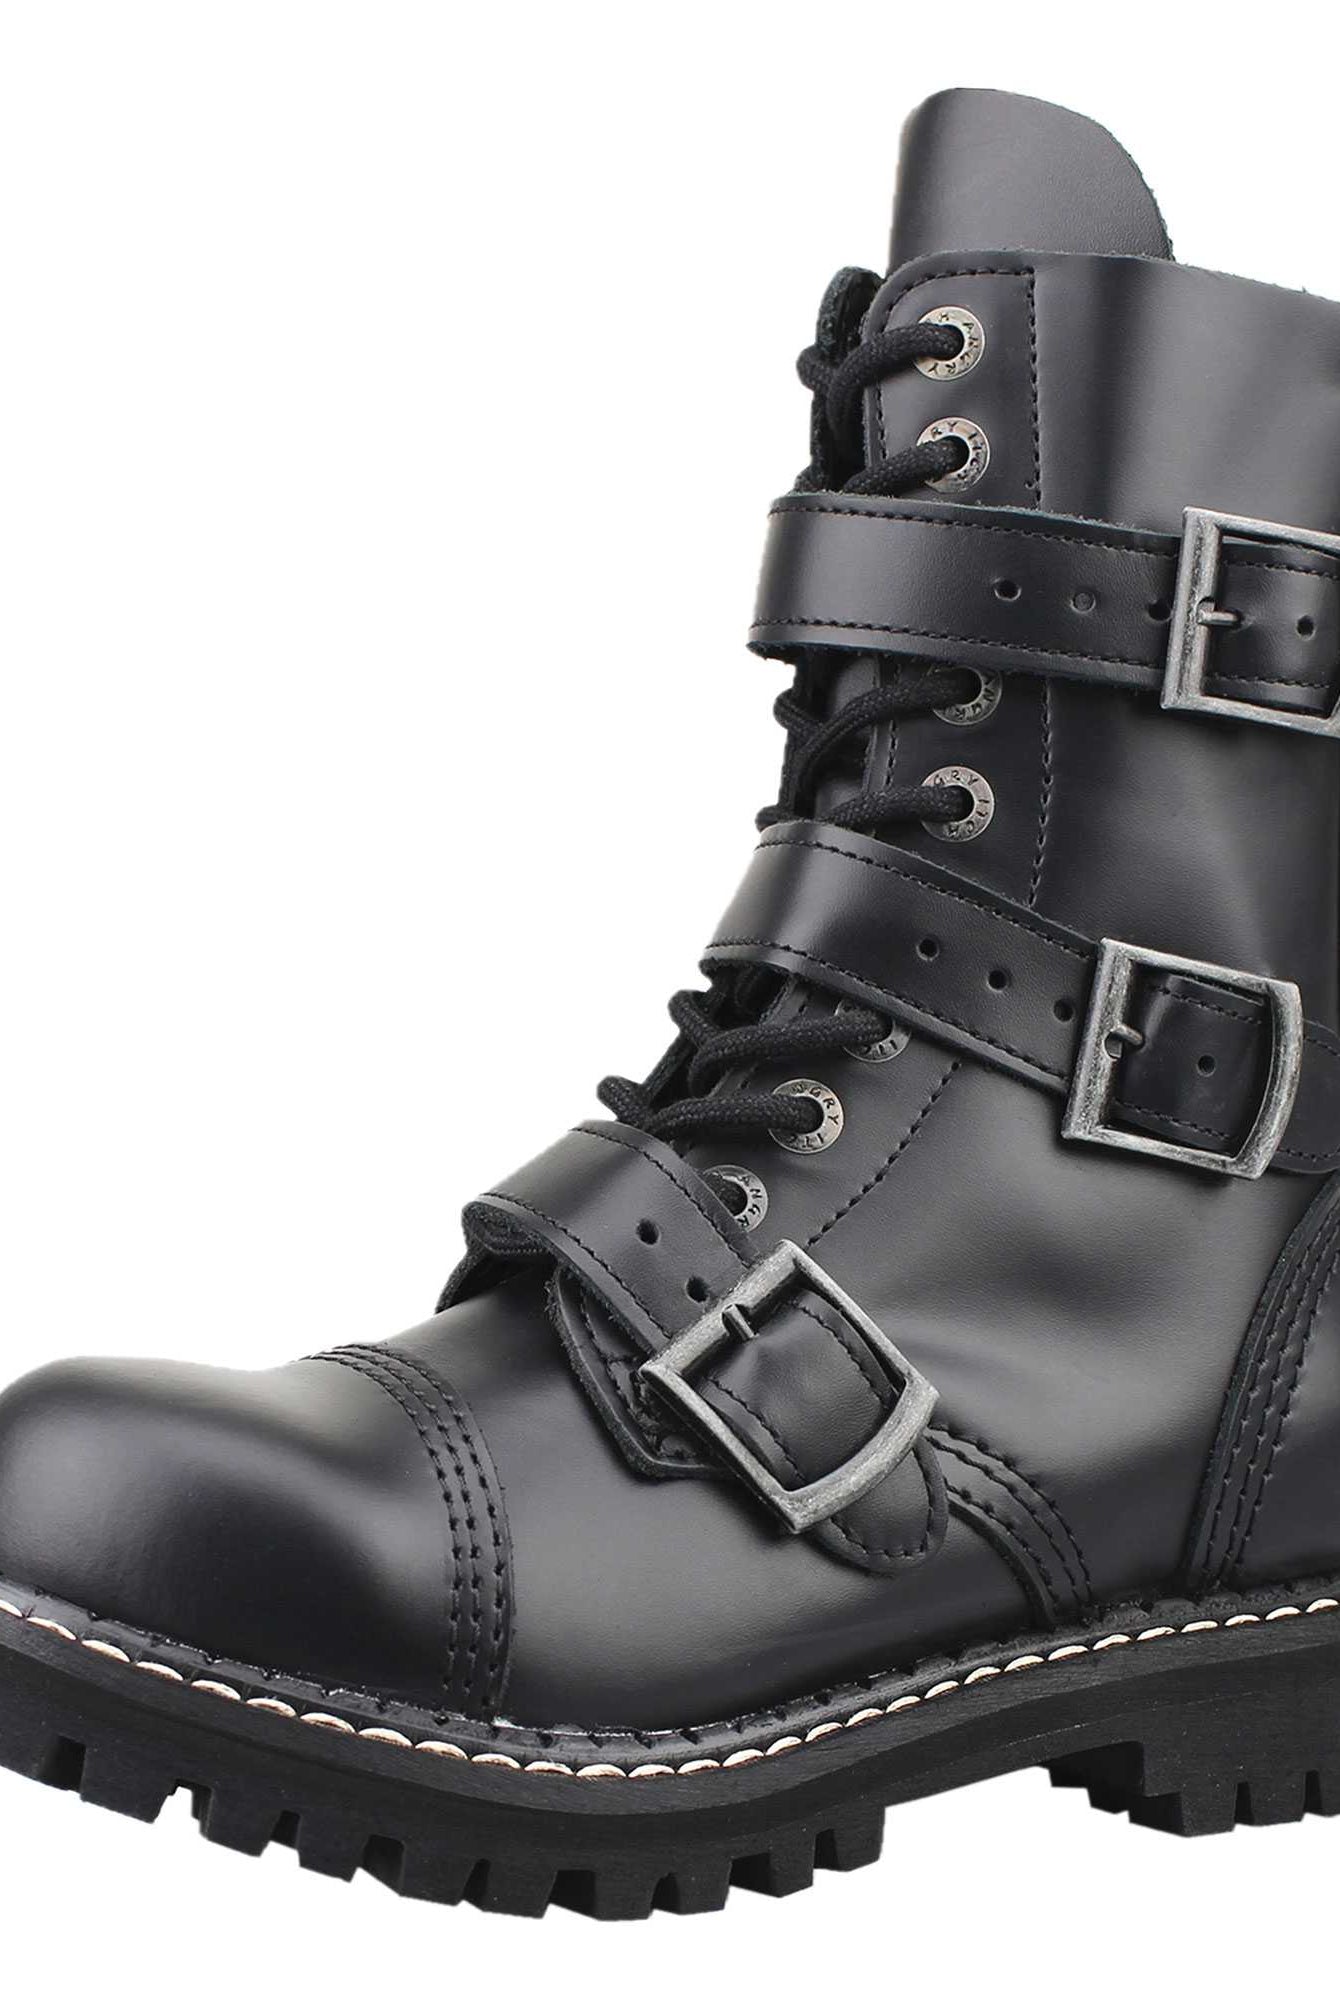 3 buckle black combat boot by Angry Itch